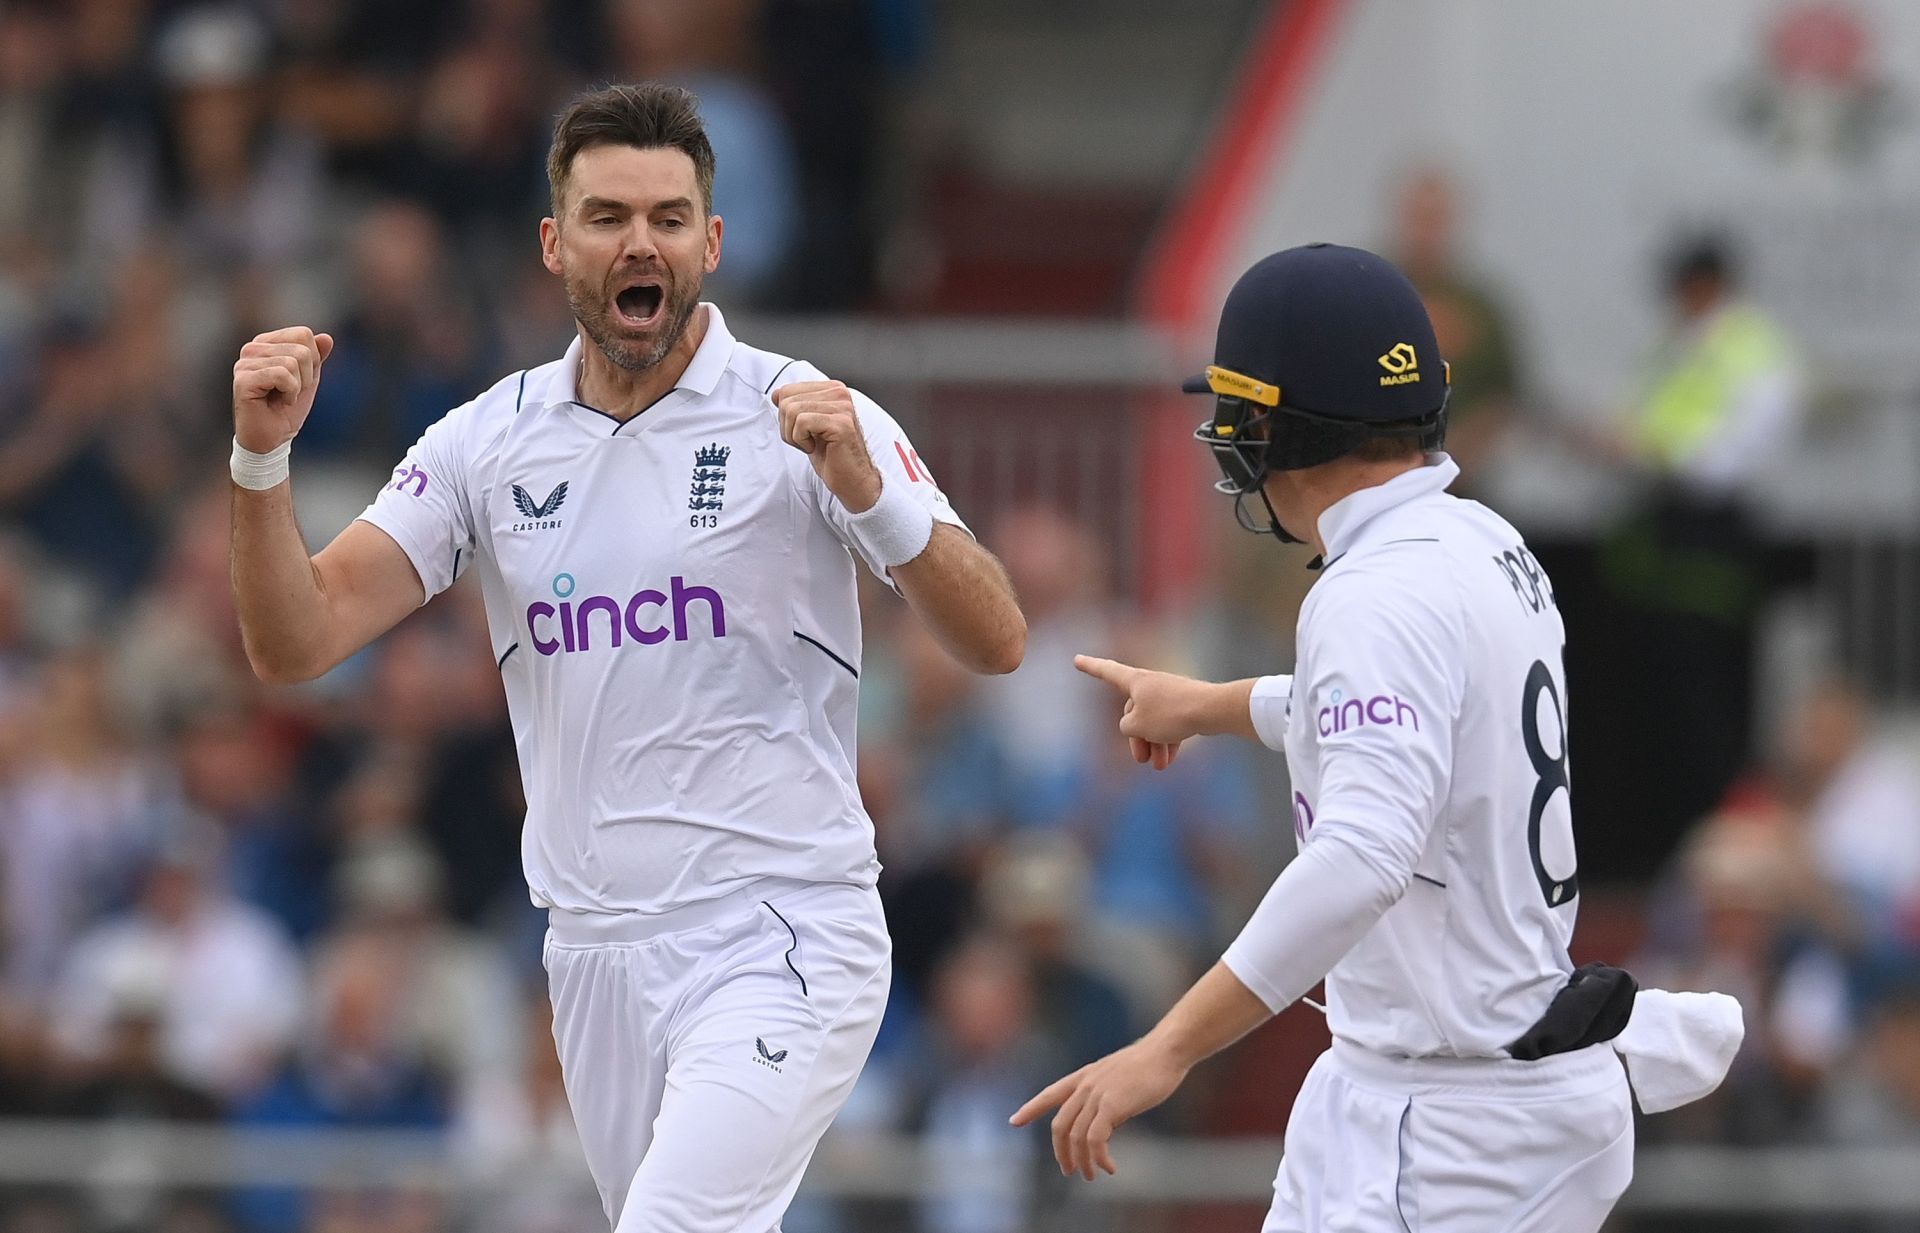 James Anderson shone in his 100th Test on home soil.